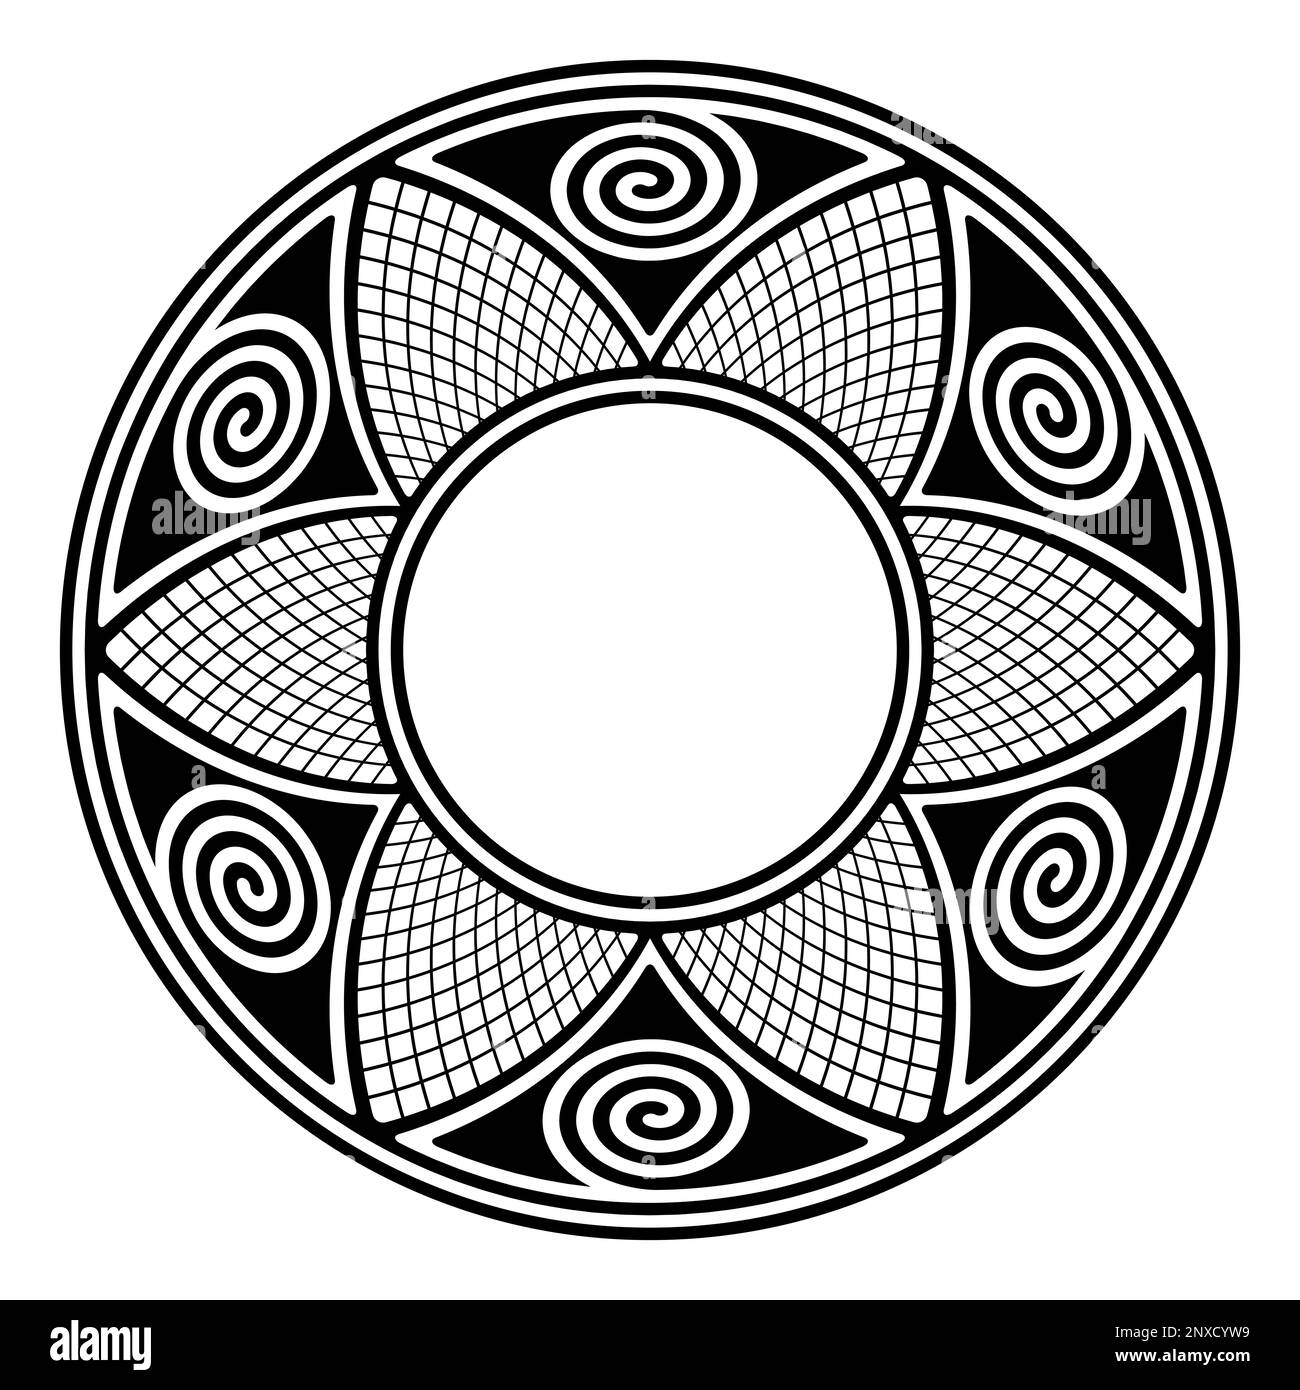 Circle frame with Hopi patterns. Decorative ornament, inspired by traditional pottery motifs of the Hopi, a Native American ethnic group. Stock Photo